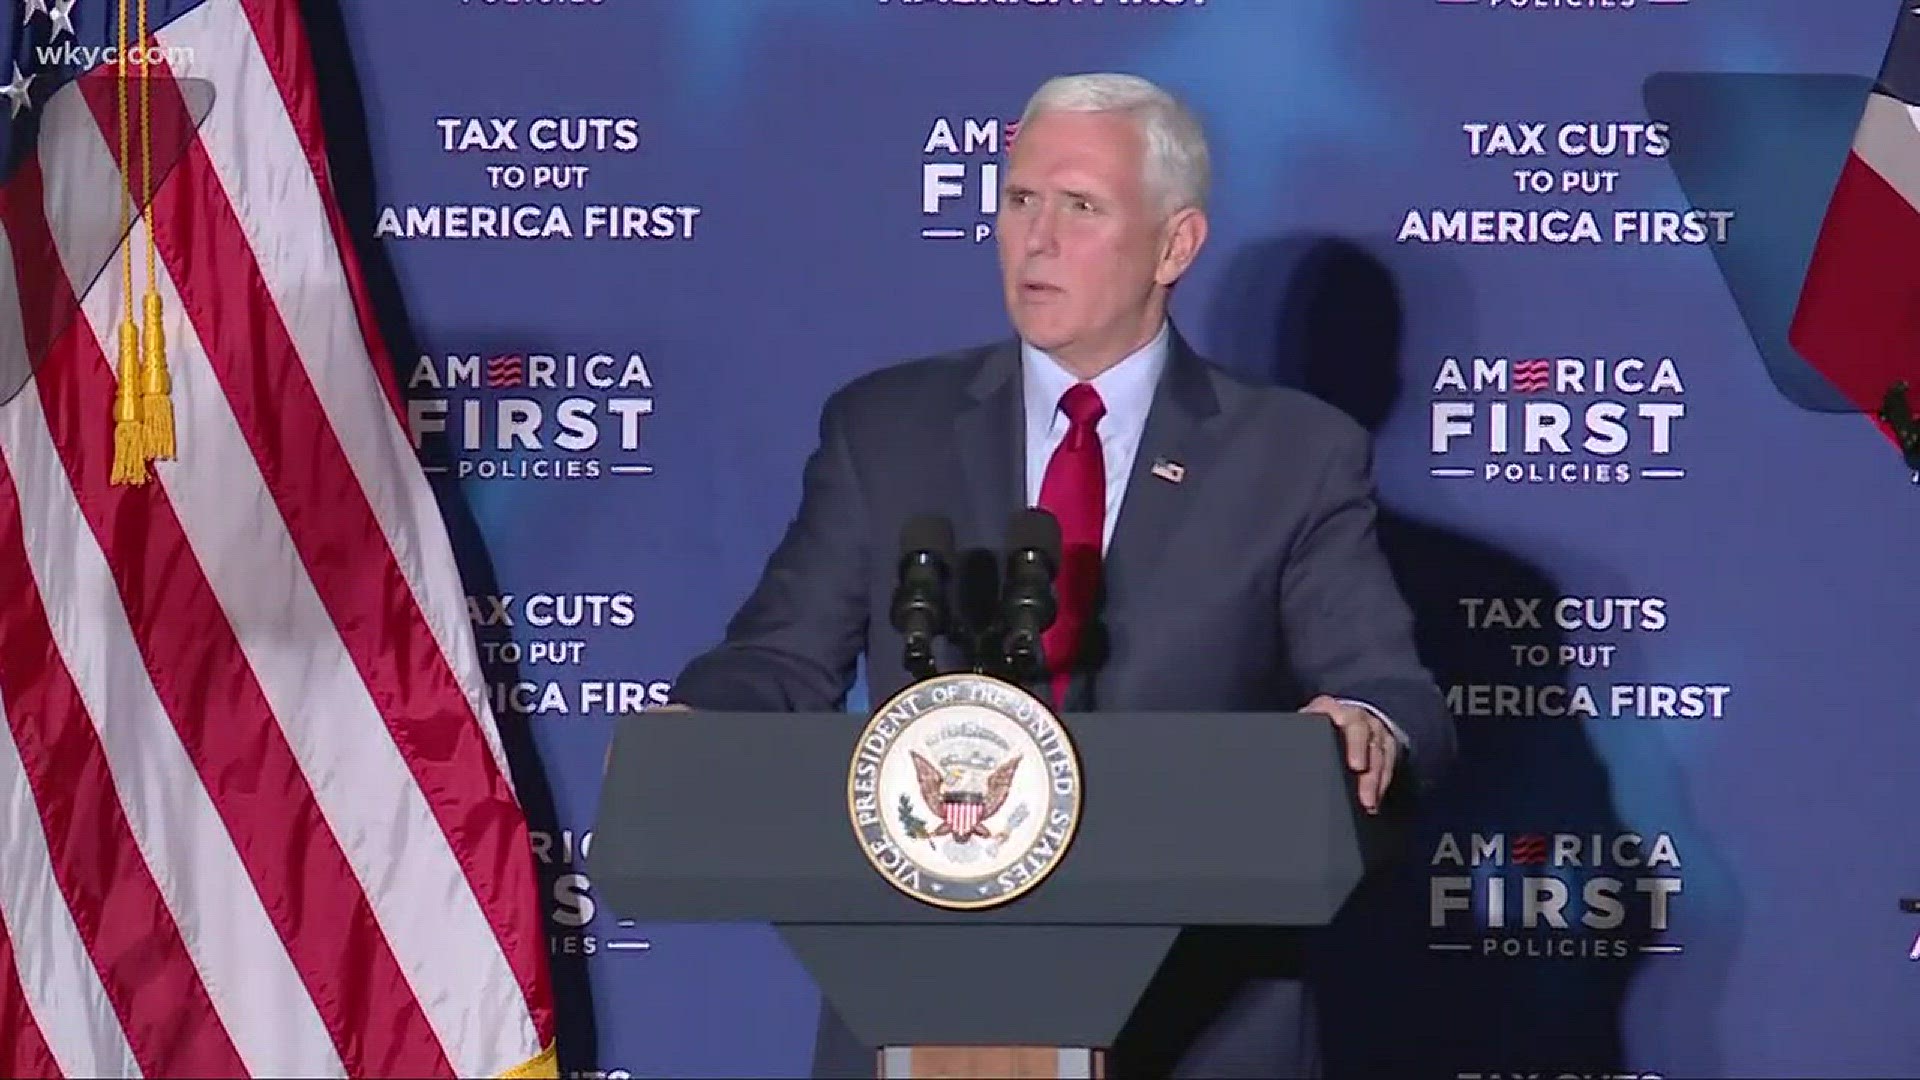 Vice President Mike Pence touts tax plan in Cleveland. Are his claims accurate?